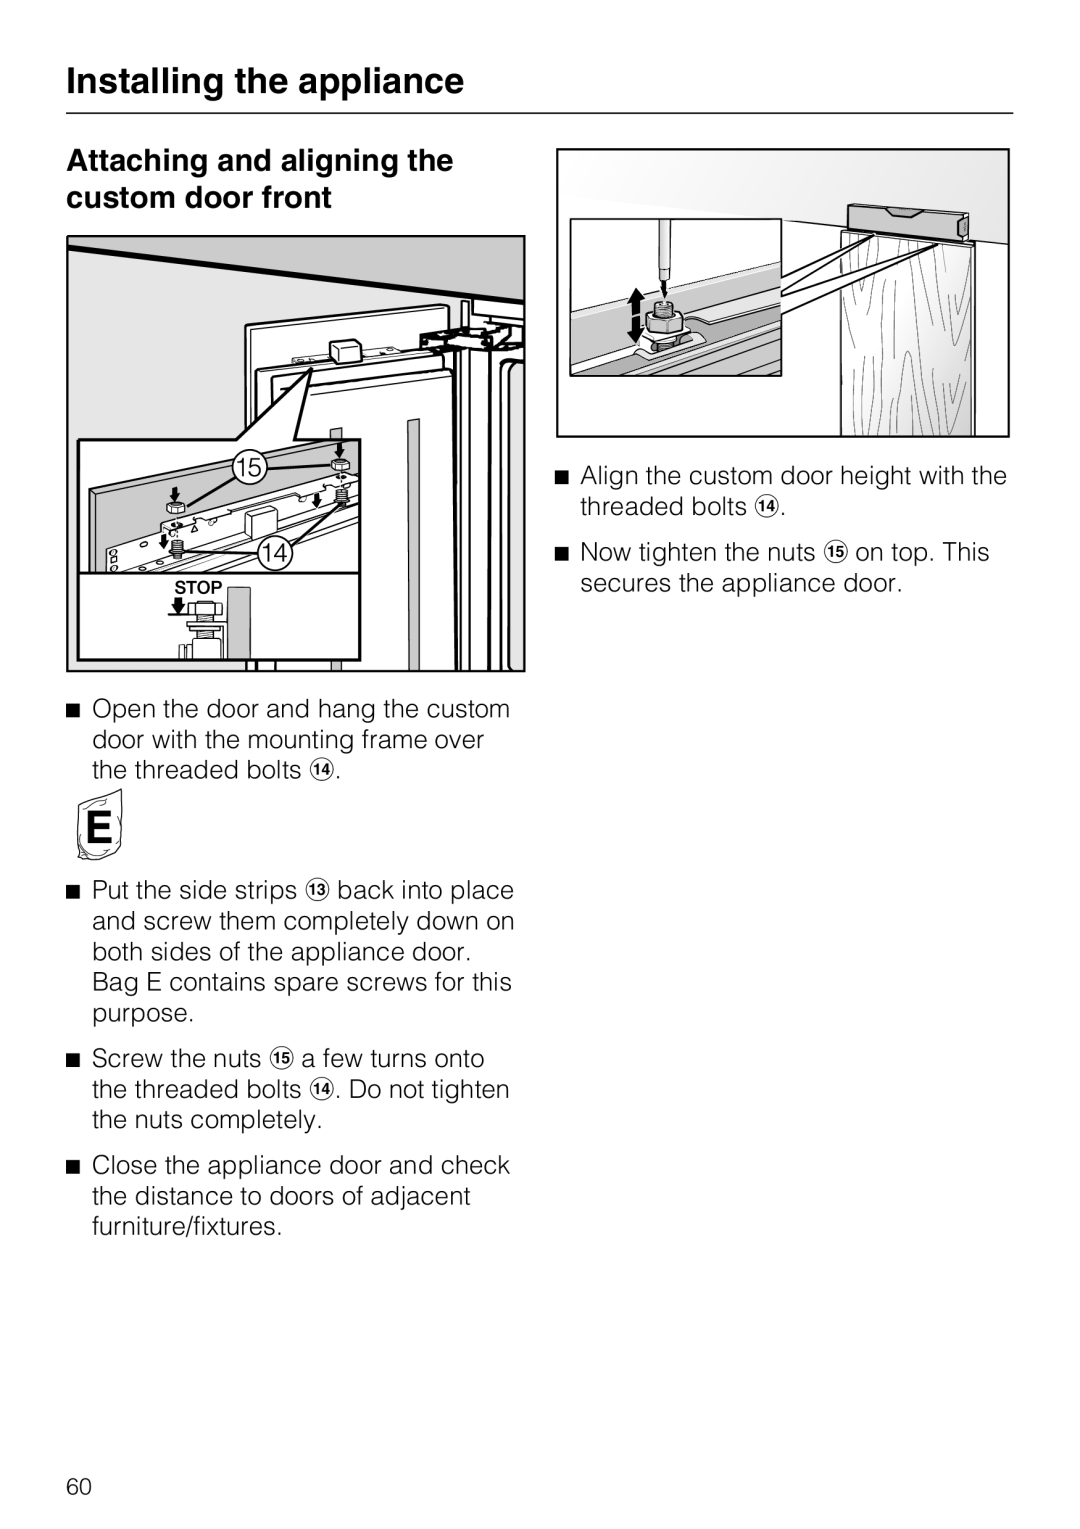 Miele 09 920 570 installation instructions Attaching and aligning the custom door front, Installing the appliance 